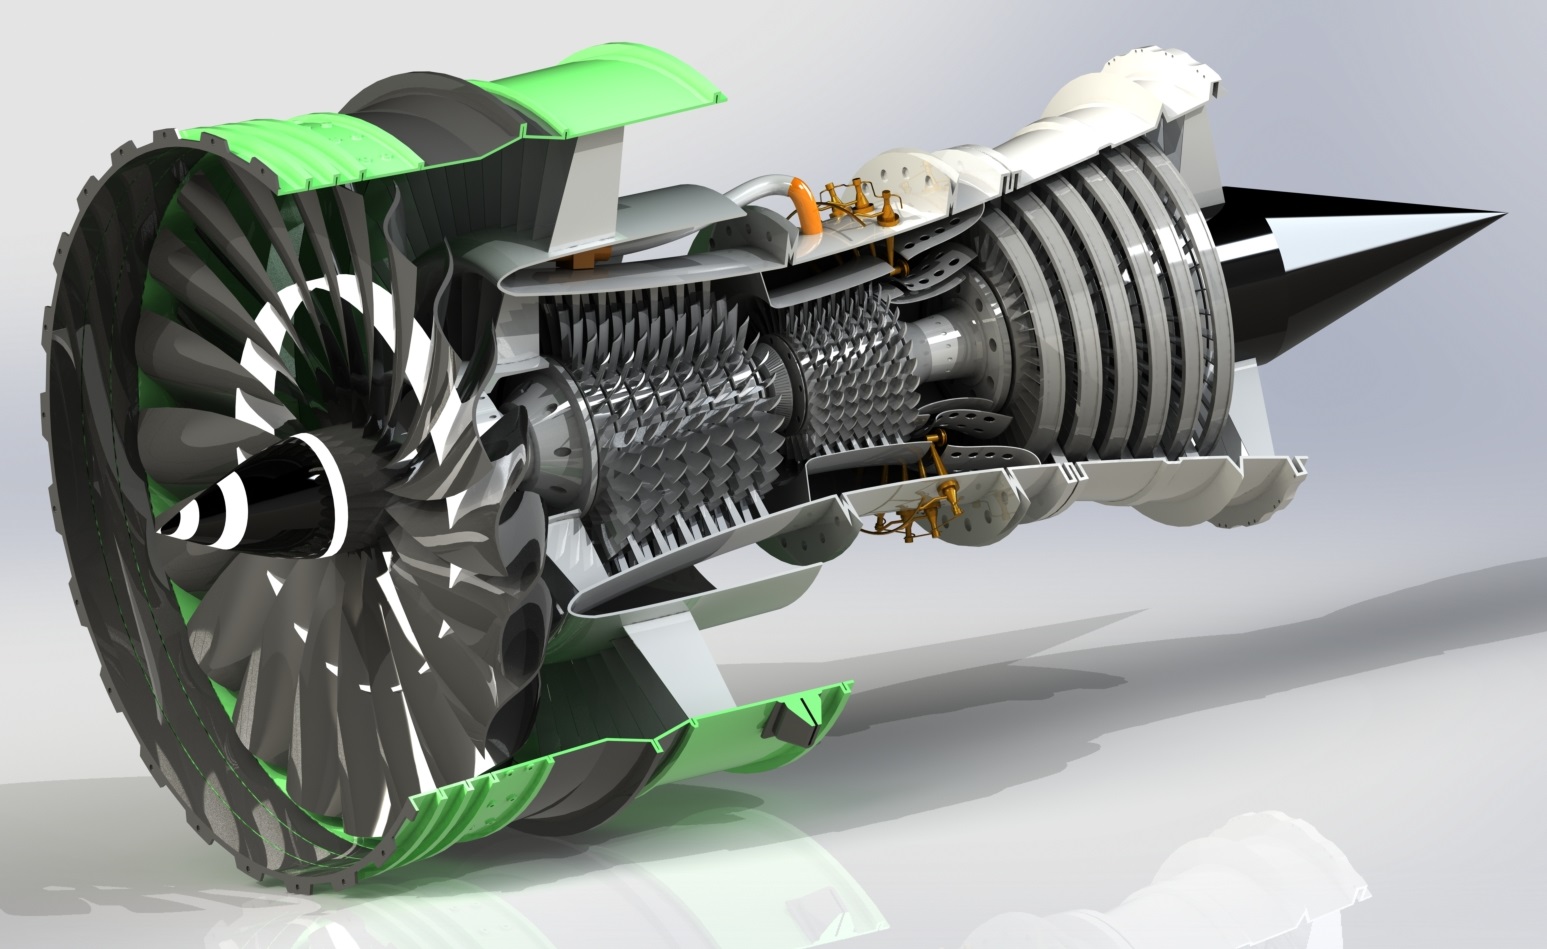 turbo solidworks download